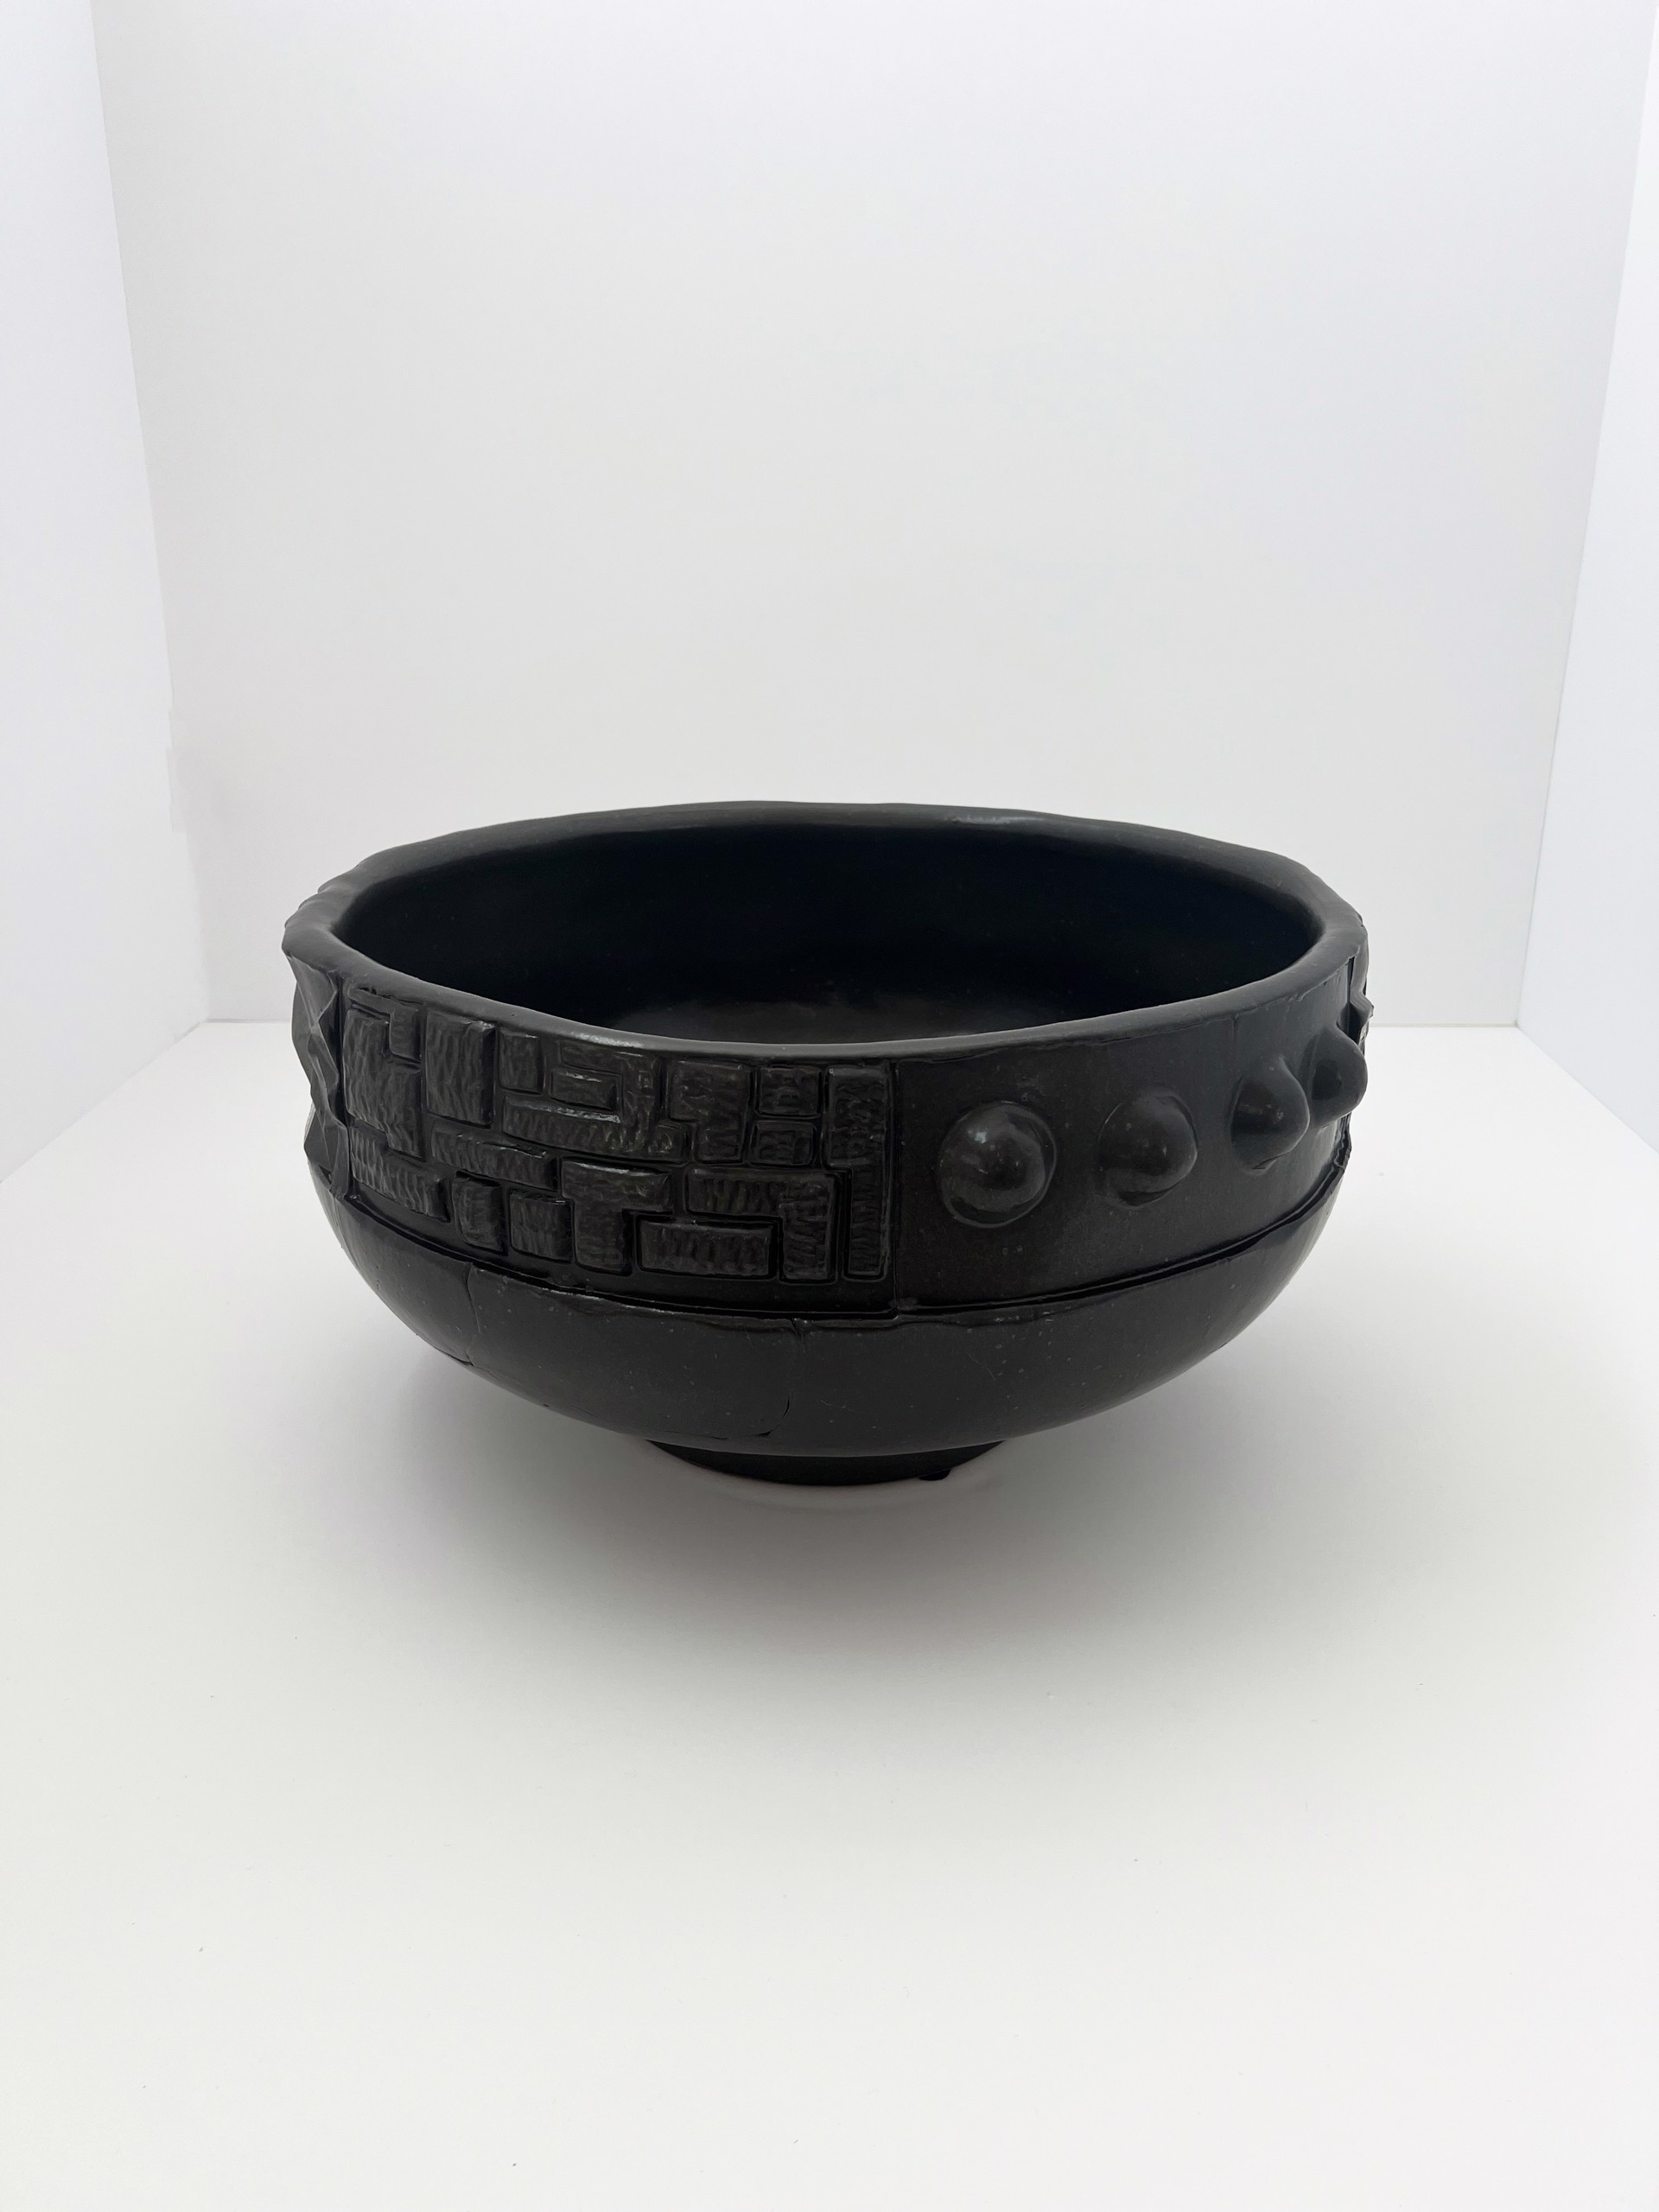 Glazed Earthenware Bowl by Ceramics Factory